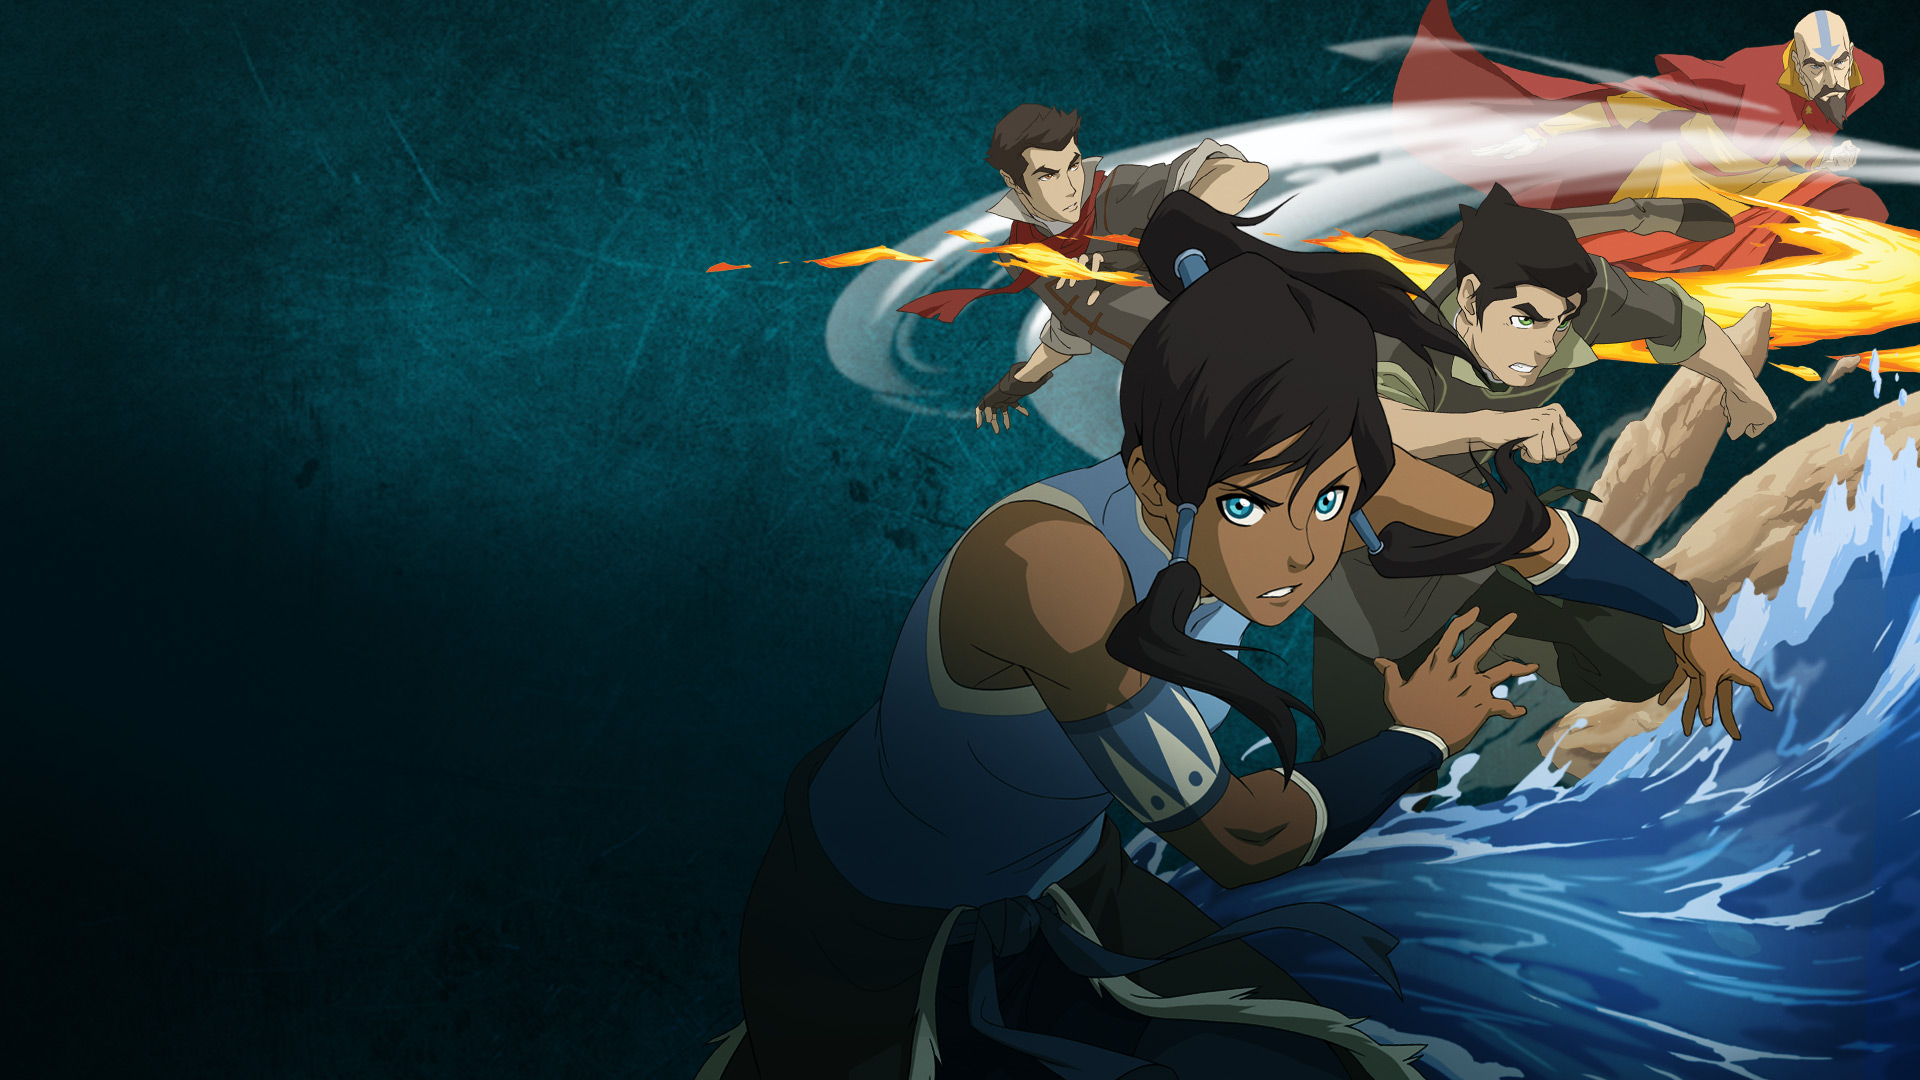 “I just saw that Korra is trending so this is a great time to say go and wa...